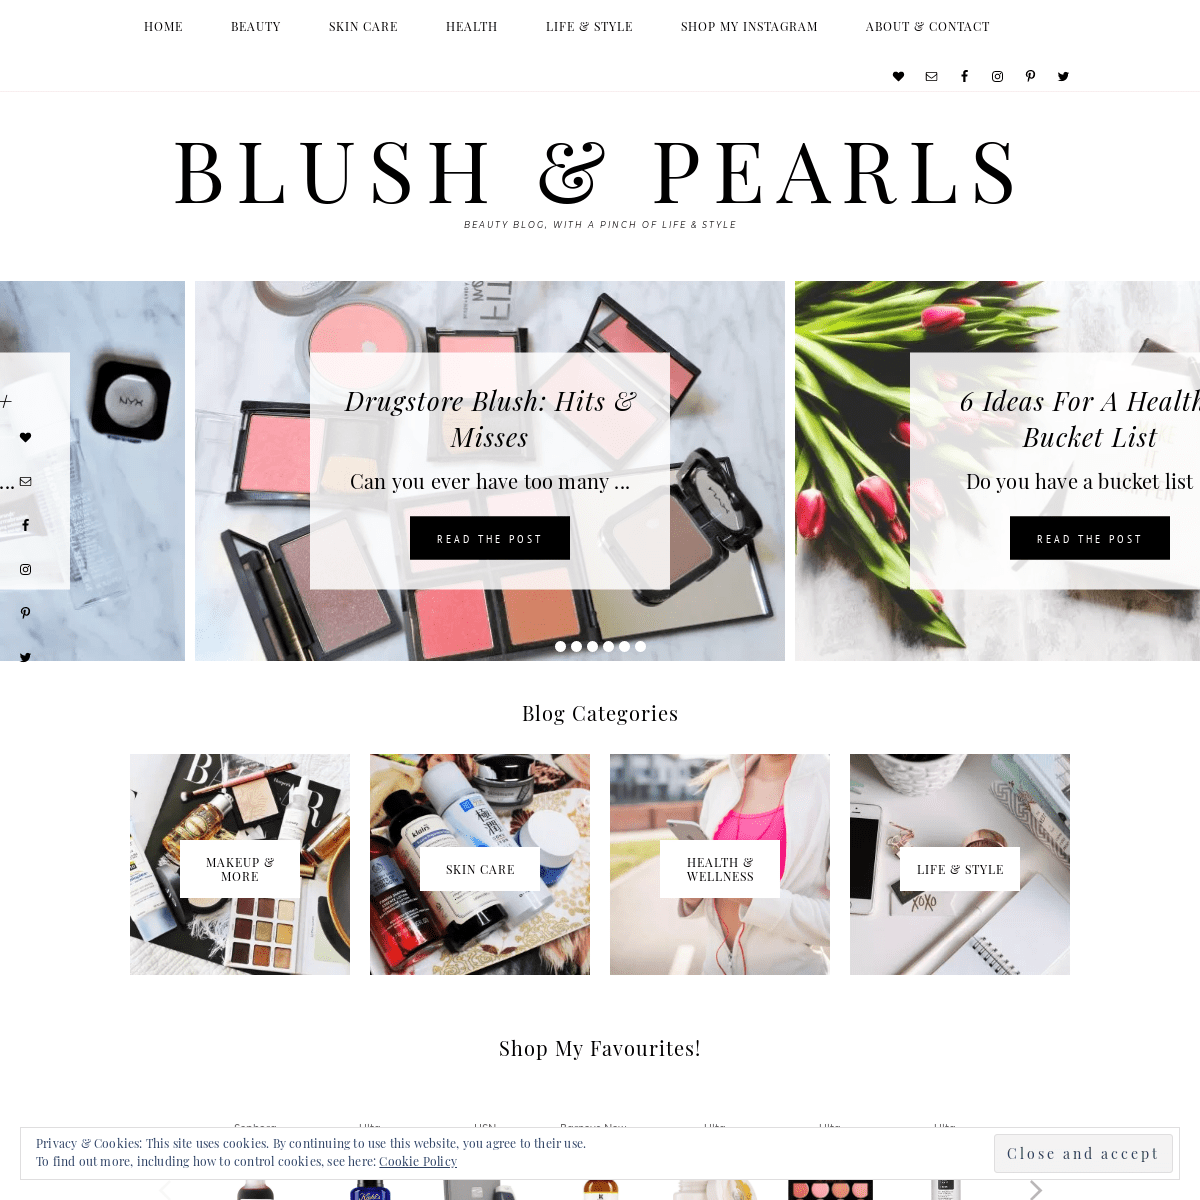 Blush & Pearls - Beauty blog, with a pinch of life & style